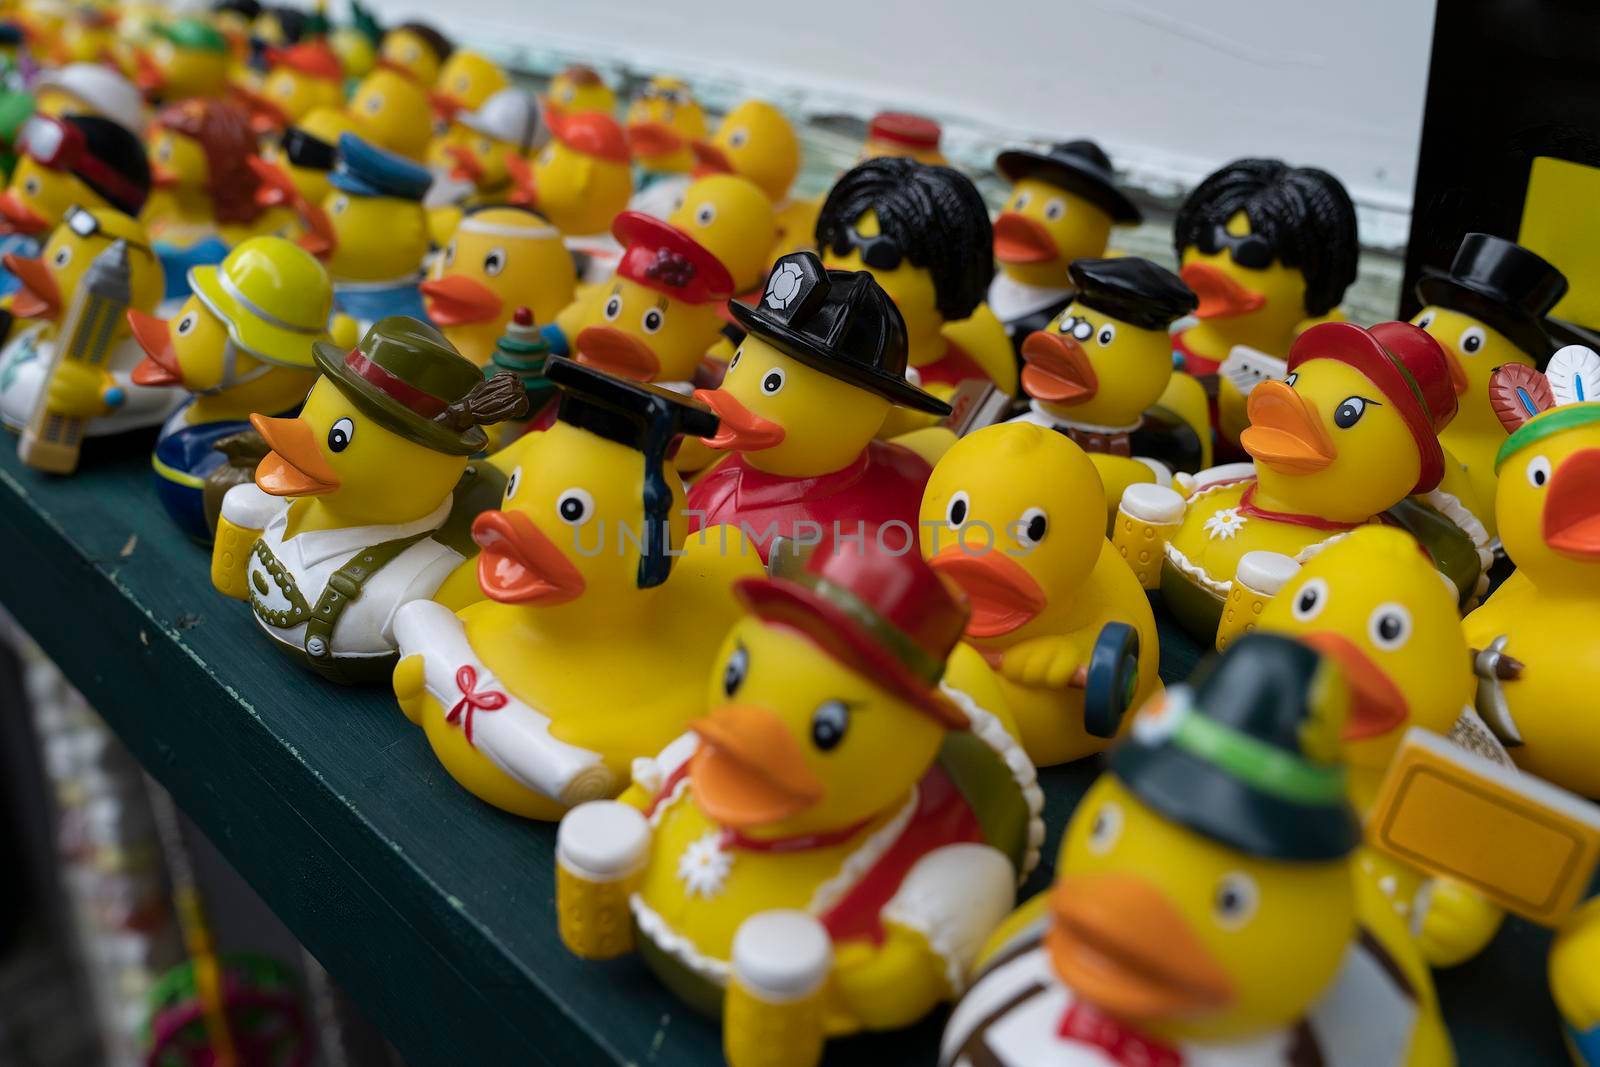 A group with many figurines rubber ducks bathing toys on a shelf with selective focus on the middle by LeoniekvanderVliet